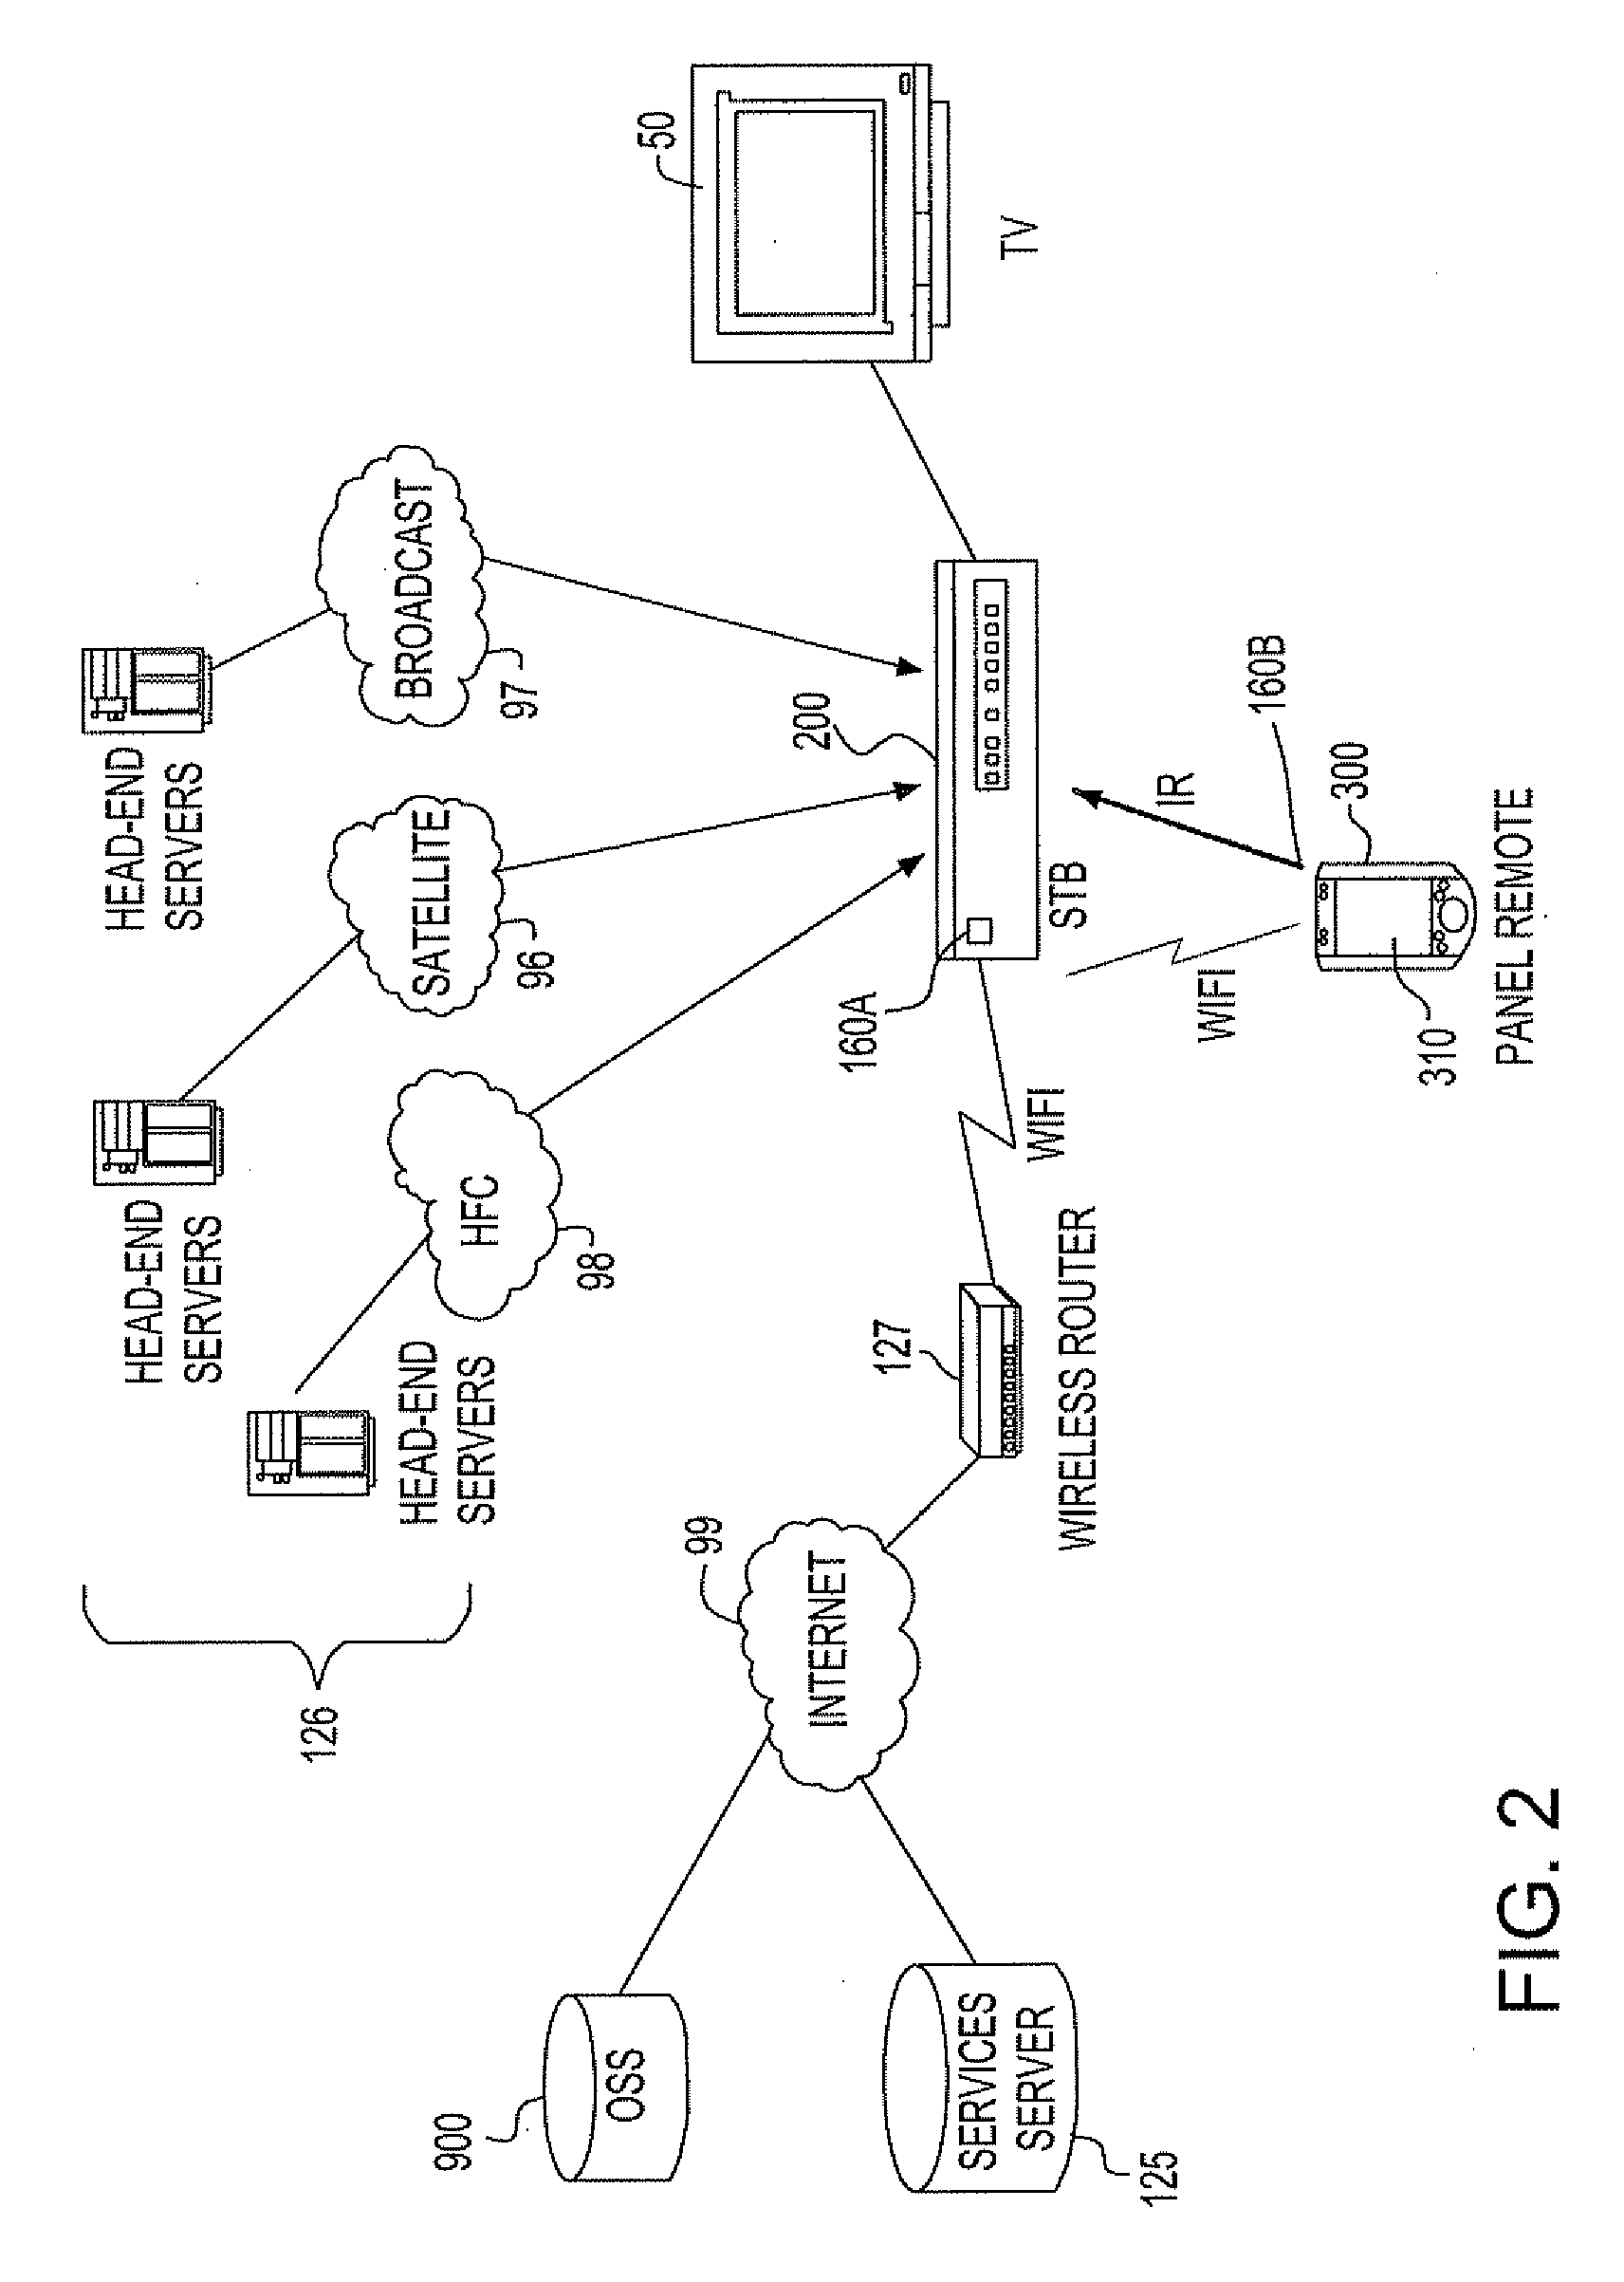 Dual display apparatus and methodology for broadcast, cable television and IPTV